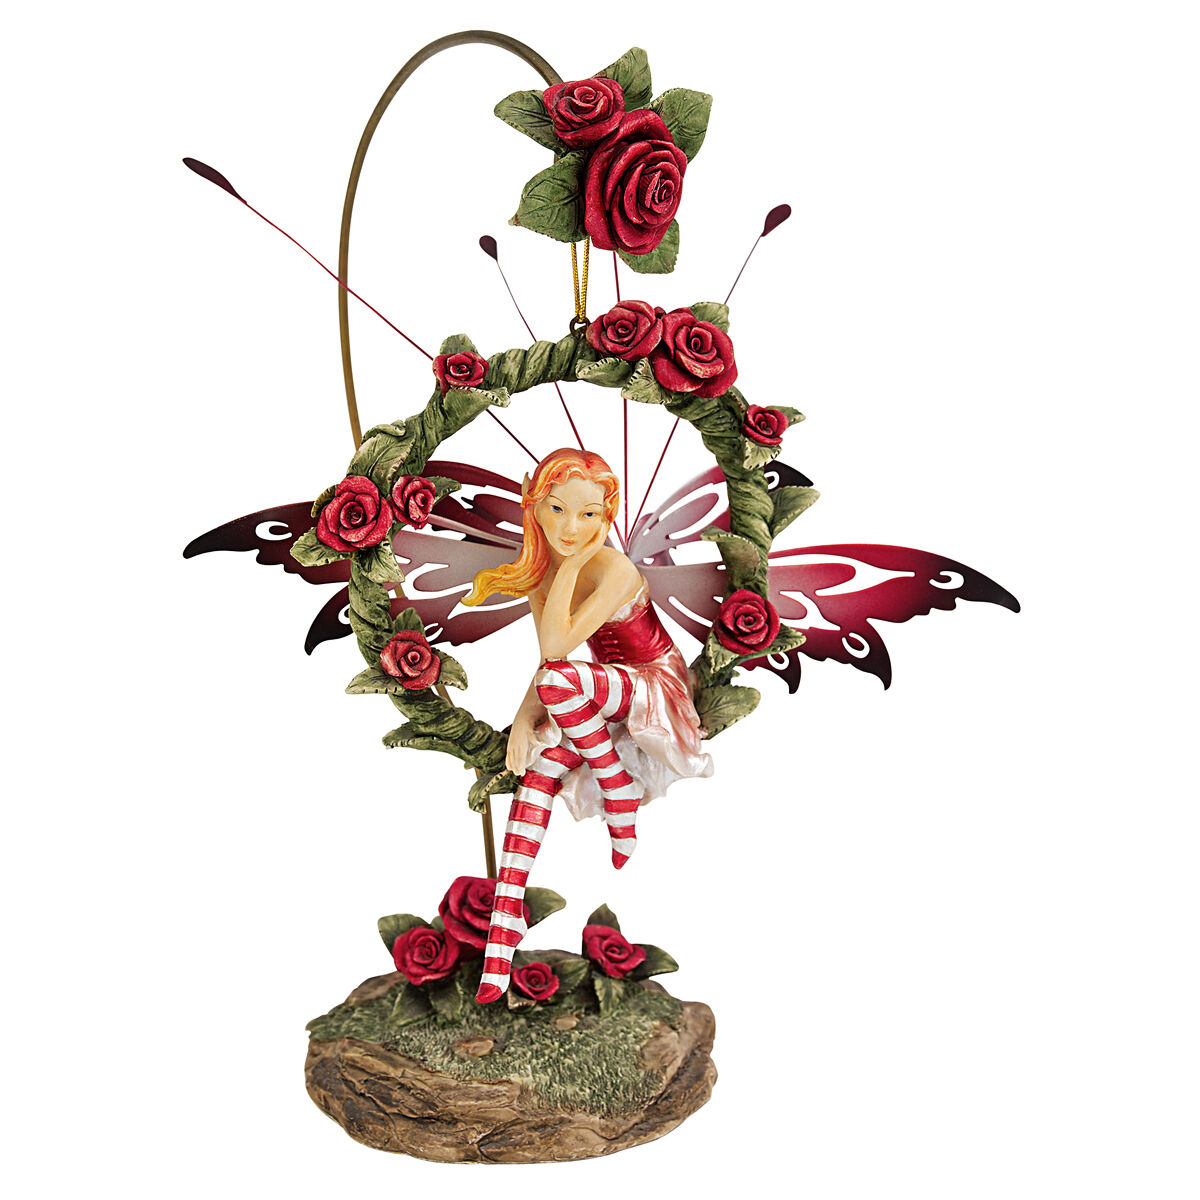 Roses in Bloom Mystical Magical Fae Fairy of the Rose Garden Sculpture w/ Stand